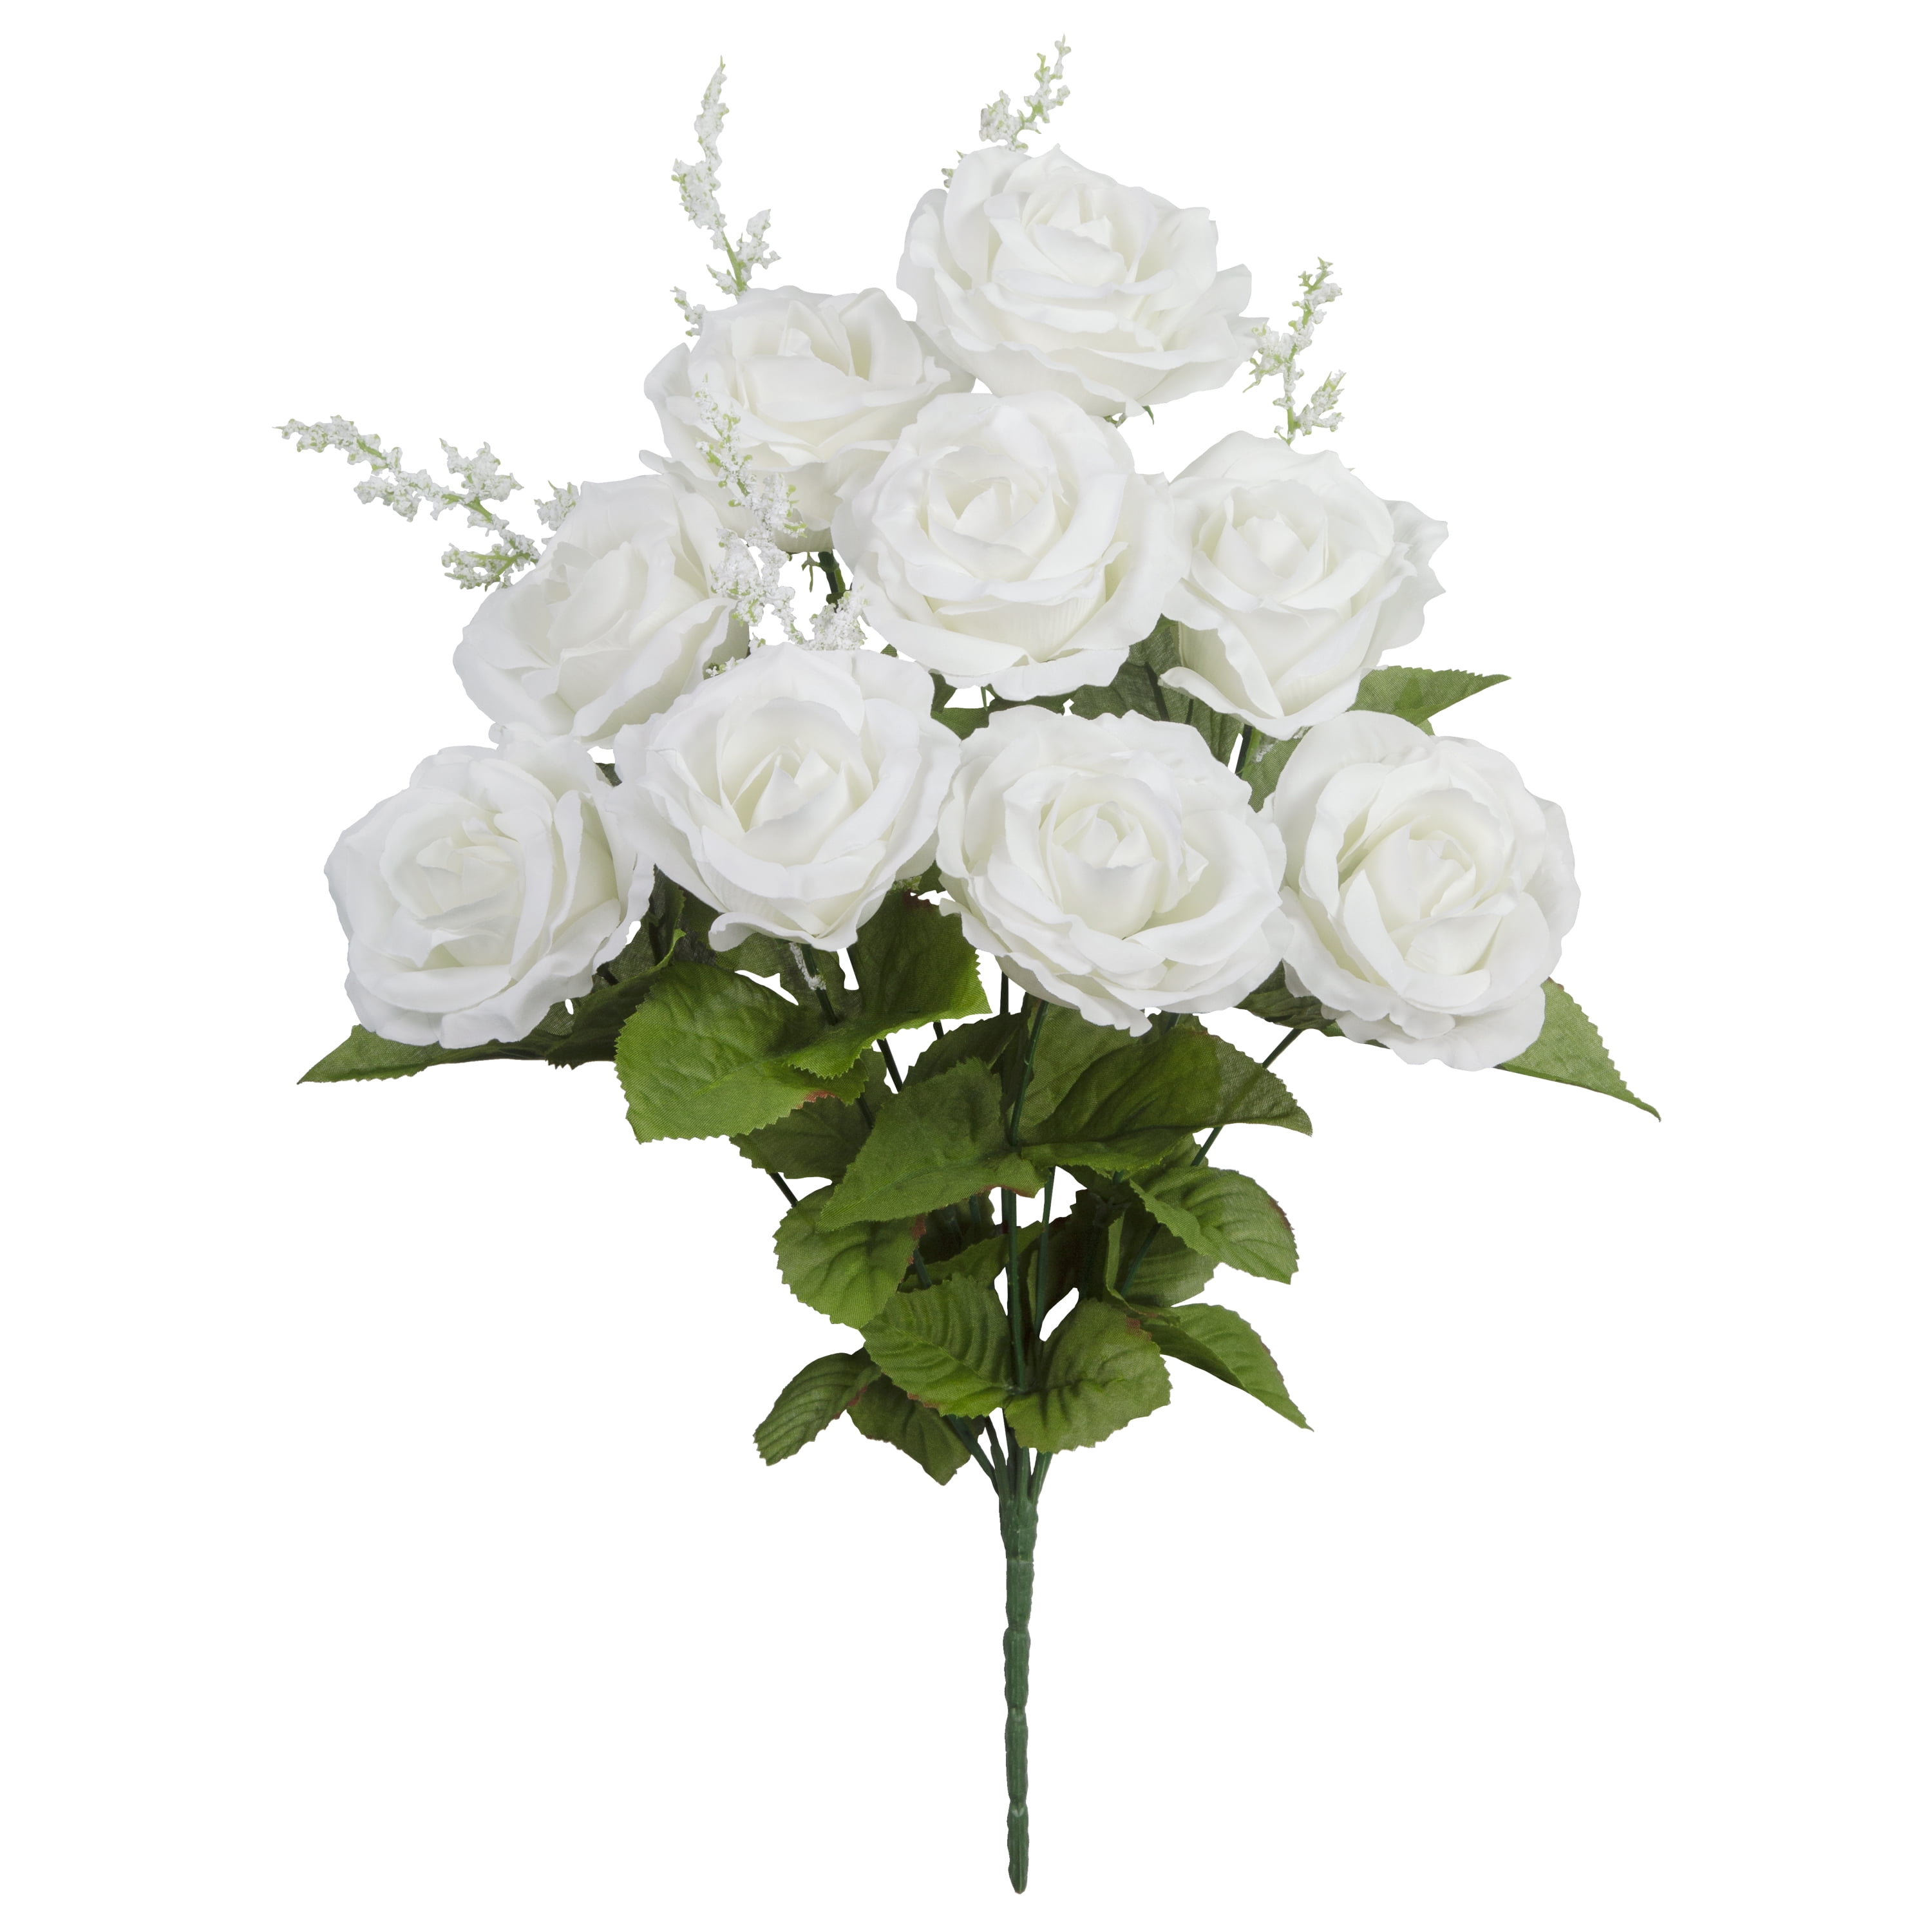 17" Artificial Silk White Roses Mixed Bush, by Mainstays